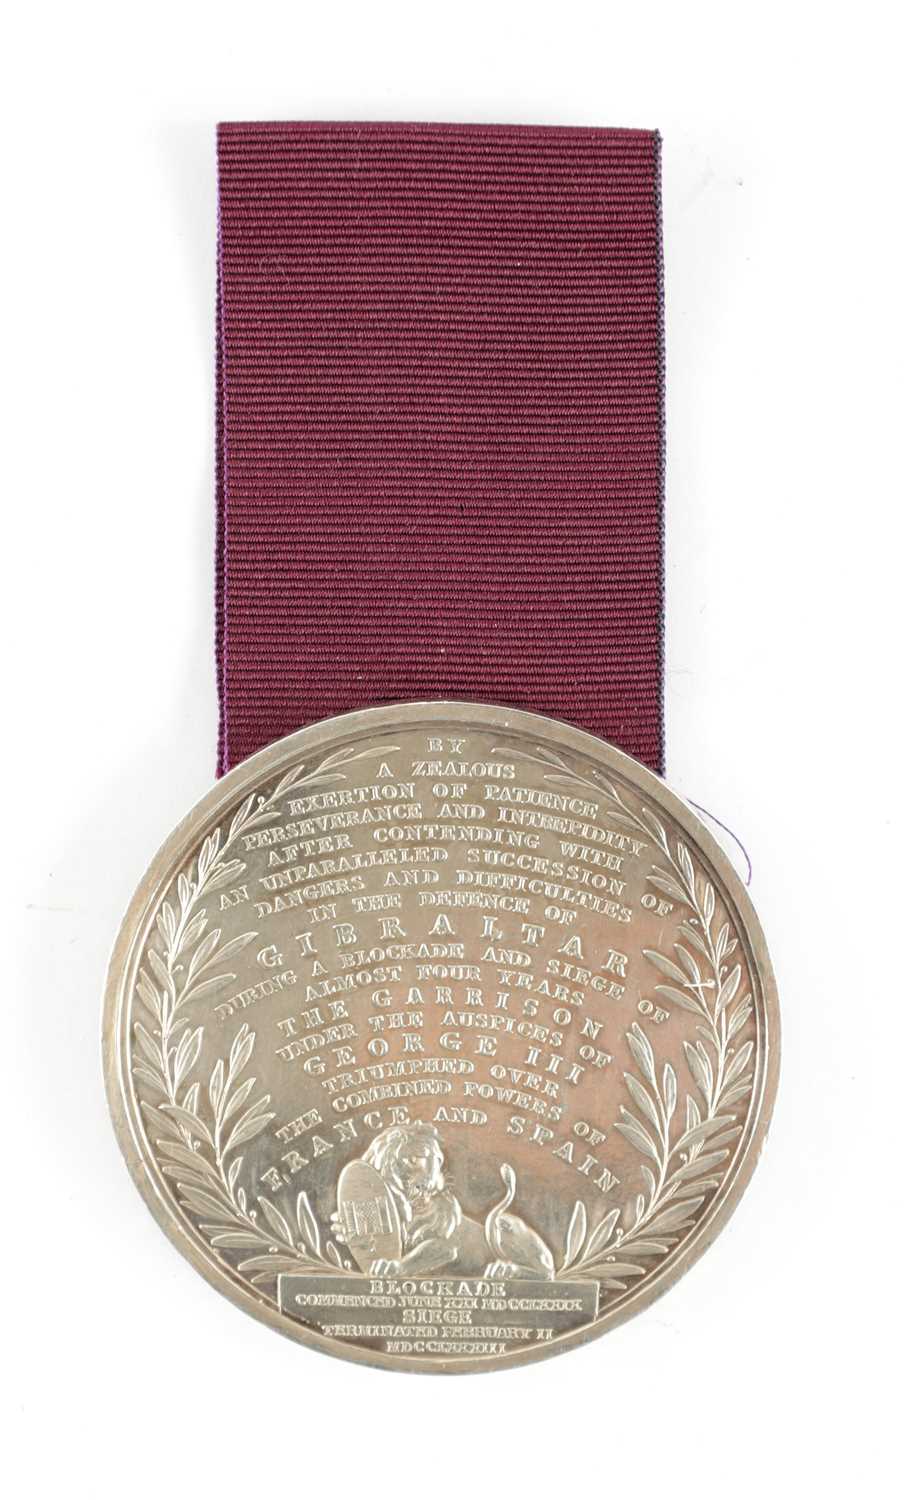 Lot 828 - A DEFENCE OF GIBRALTAR 1779-1783, SIR THOMAS PICTON’S MEDAL